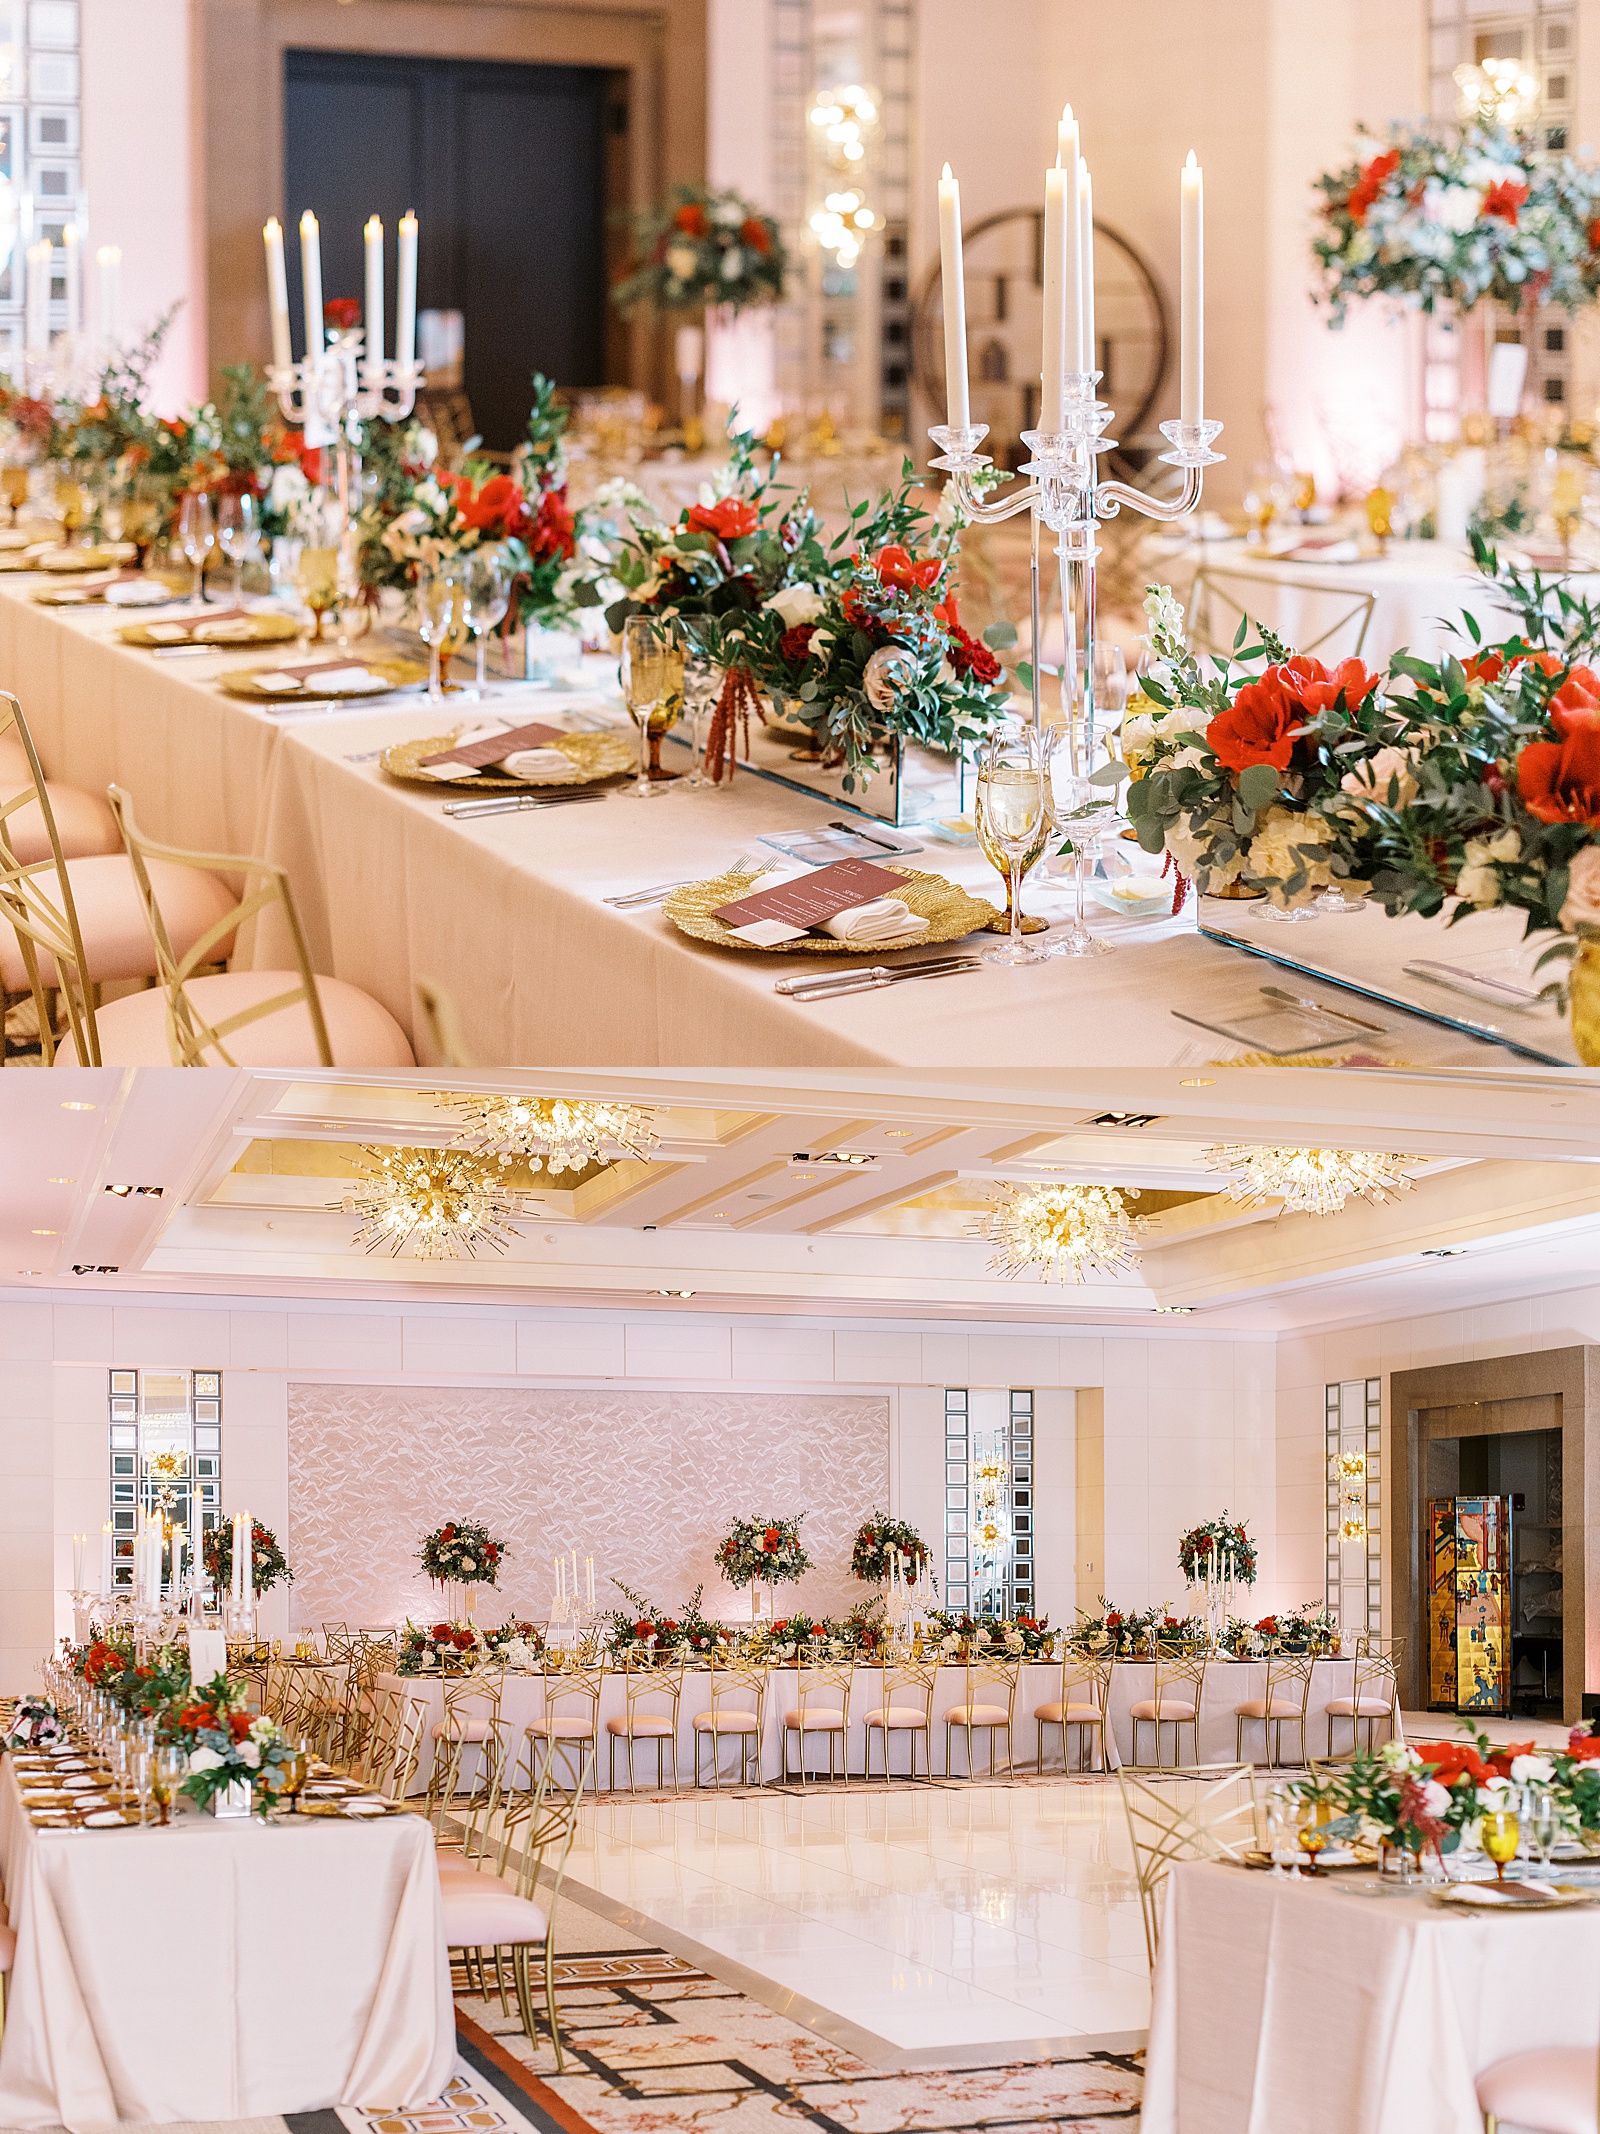 A large wedding reception set up for a Mandarin Boston Wedding with red and gold accents.